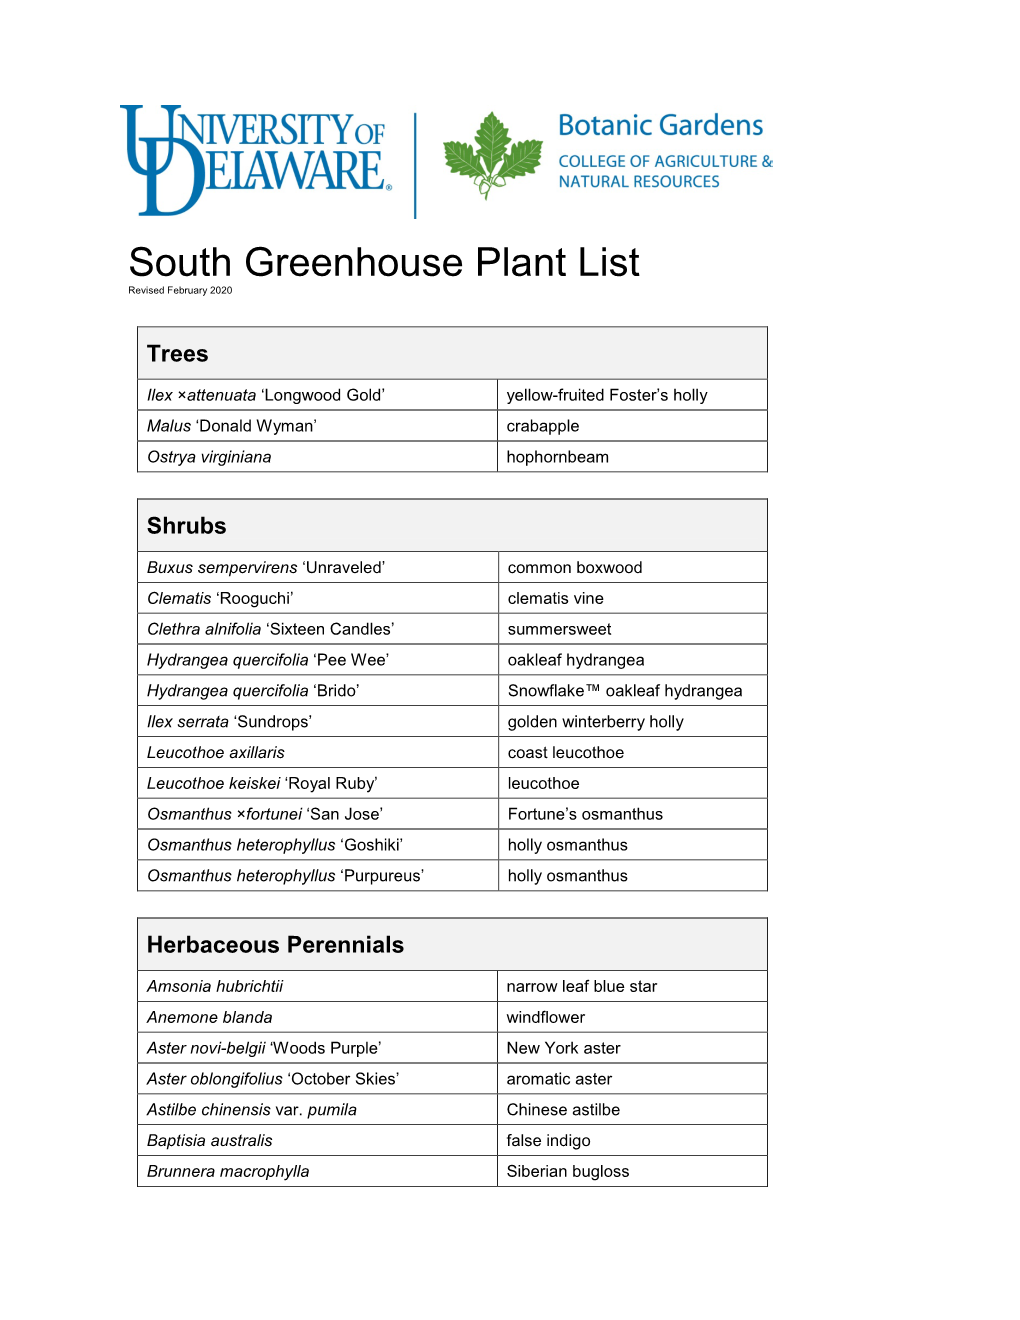 South Greenhouse Plant List Revised February 2020